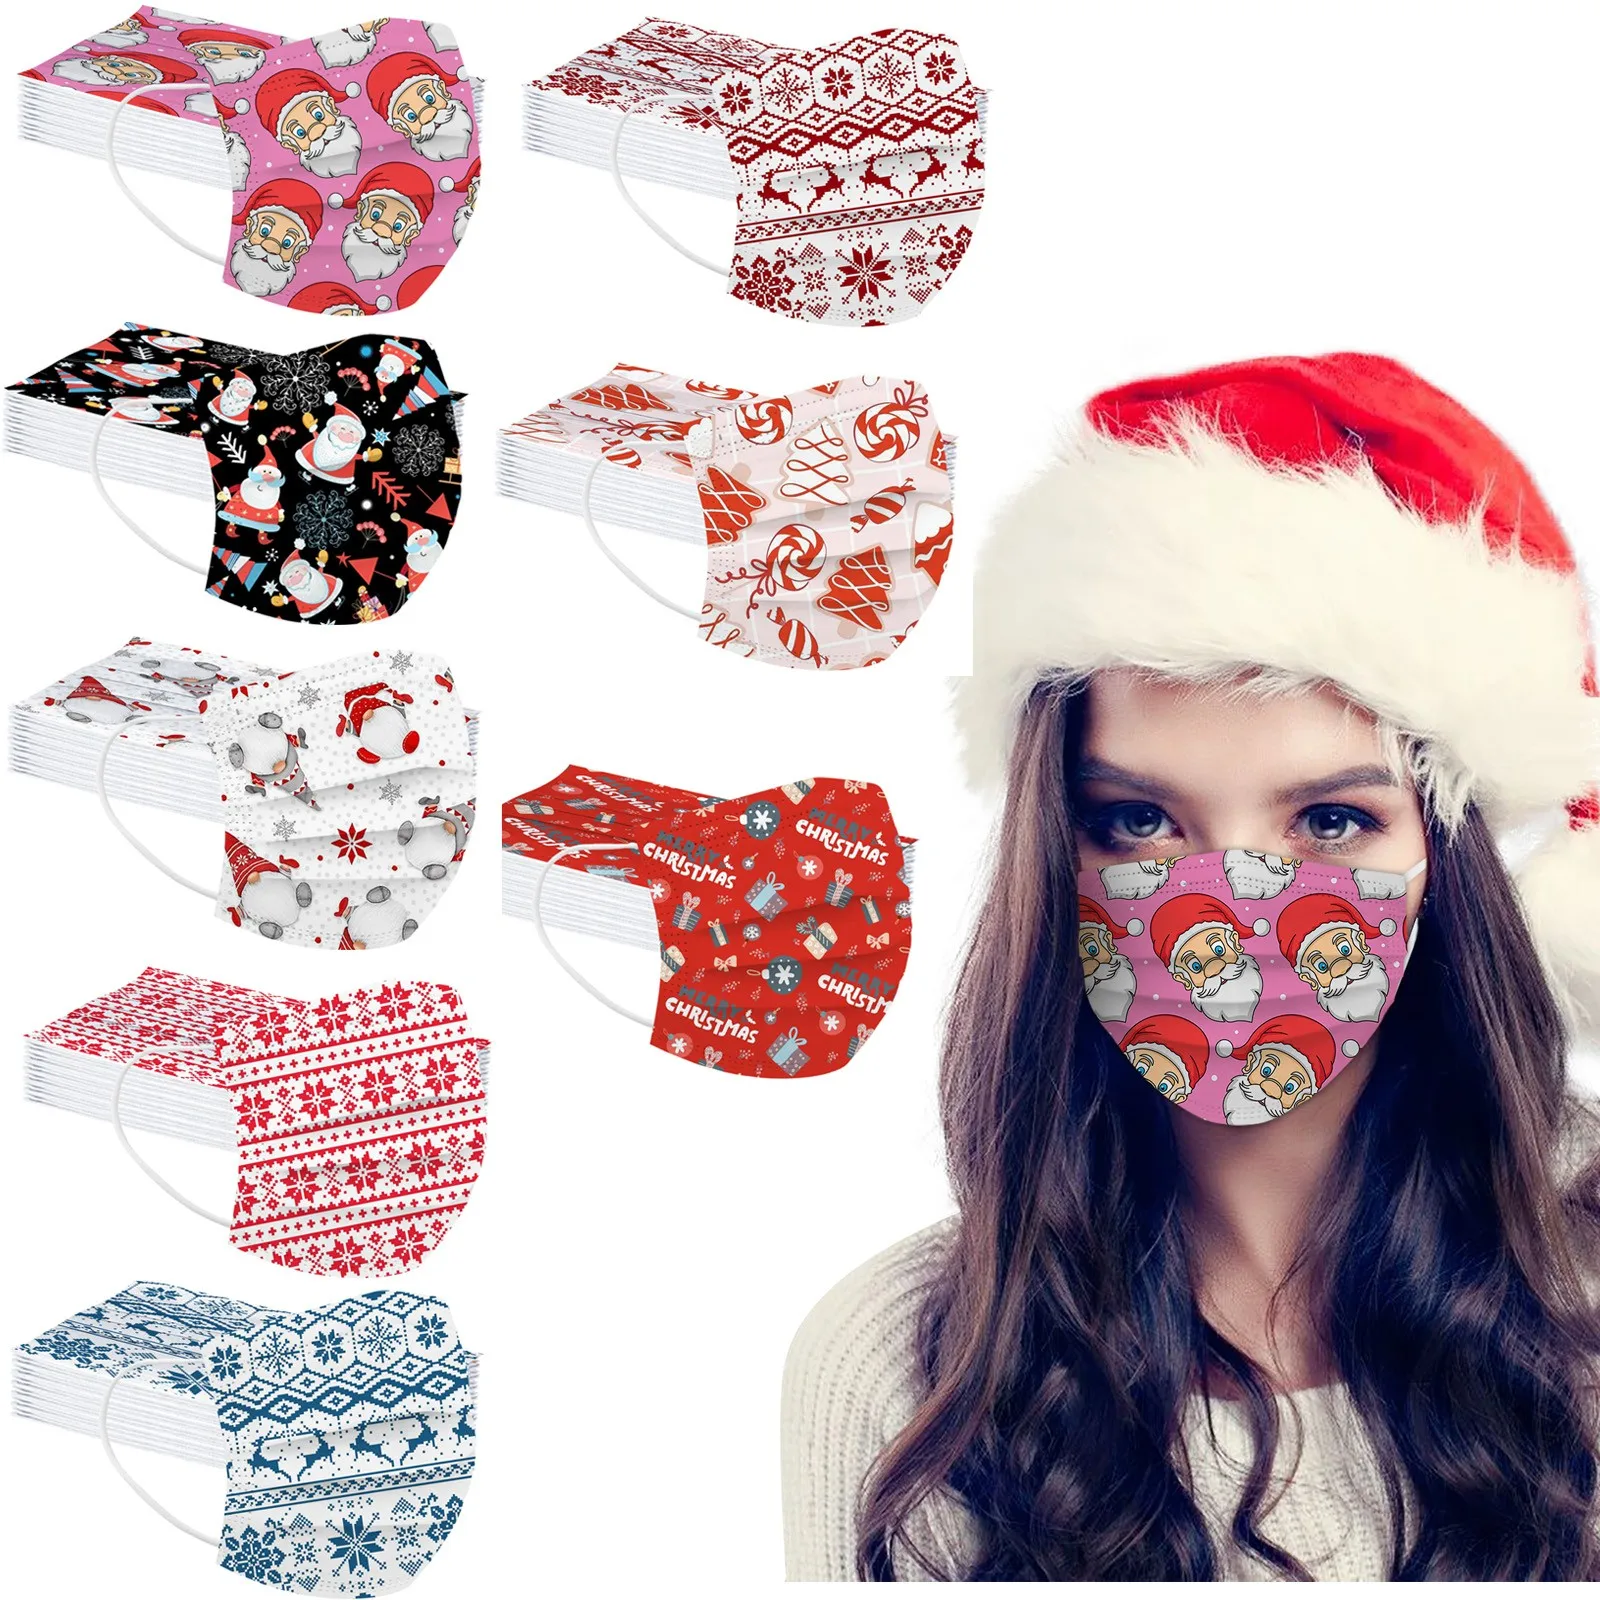 

10pcs Christmas Disposable Masks Adult Printed Anime Mask for face Women Covers Fashion Mouths Halloween Cosplay Navidad 2021